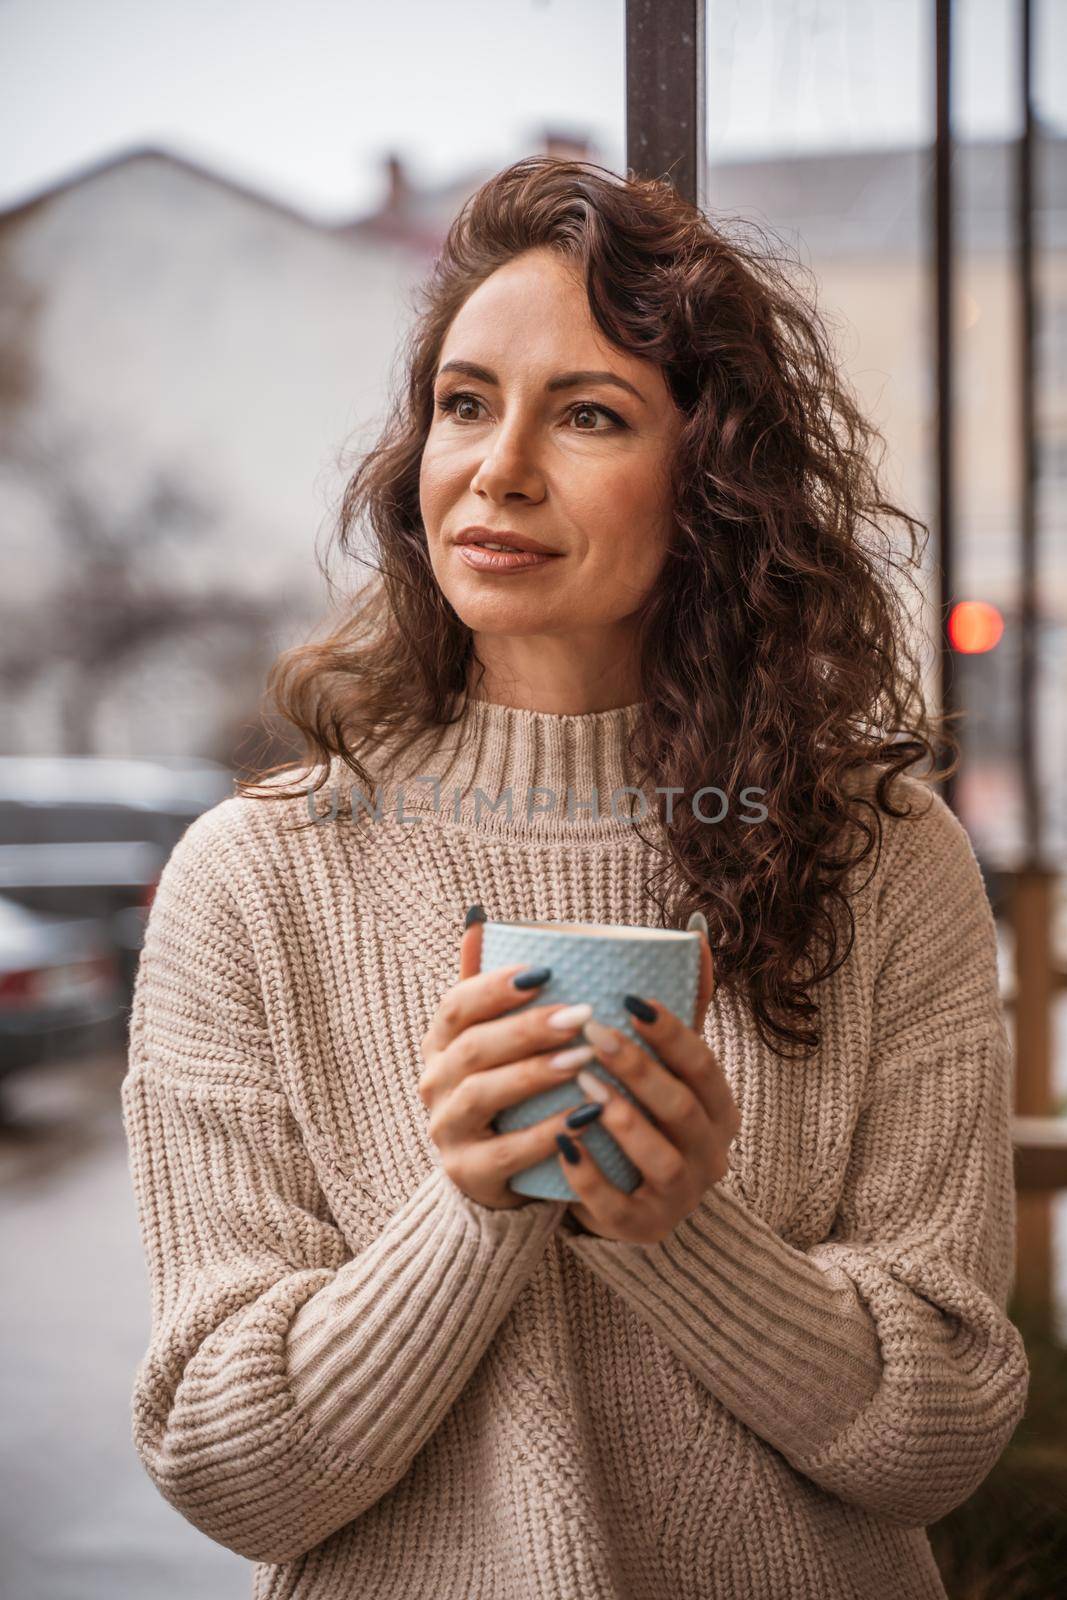 A middle-aged woman in a beige sweater with a blue mug in her hands is in a street cafe on the veranda.